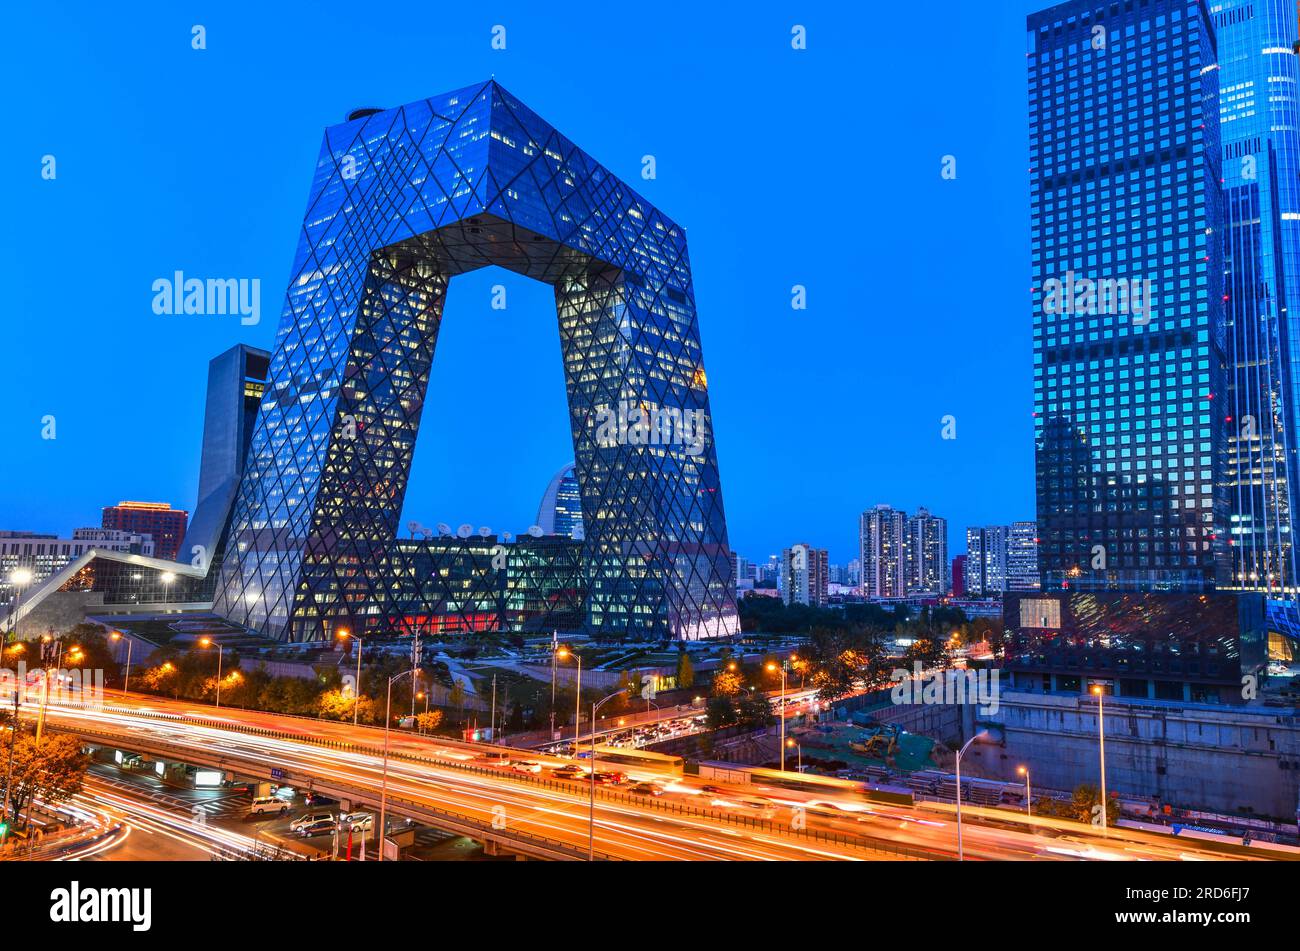 Beijing,China - October 31, 2019:A famous landmark building China CCTV (CCTV) and China Zun Citic Tower at twilight time Stock Photo